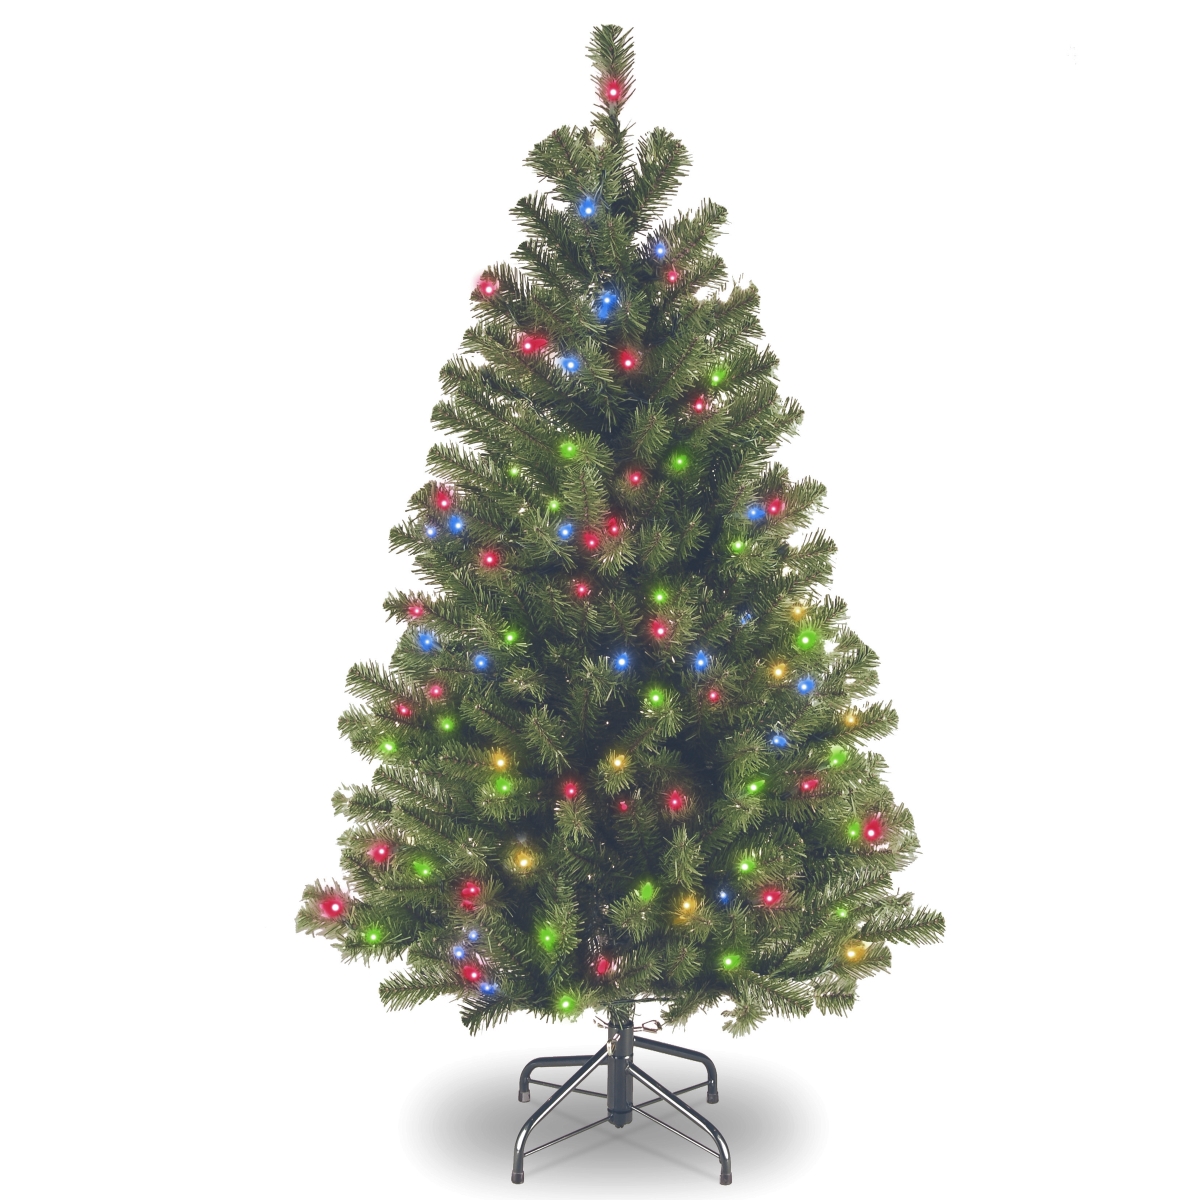 National Tree Nrv7-301-45 4.5 Ft. North Valley Spruce Tree With 200 Multicolor Lights